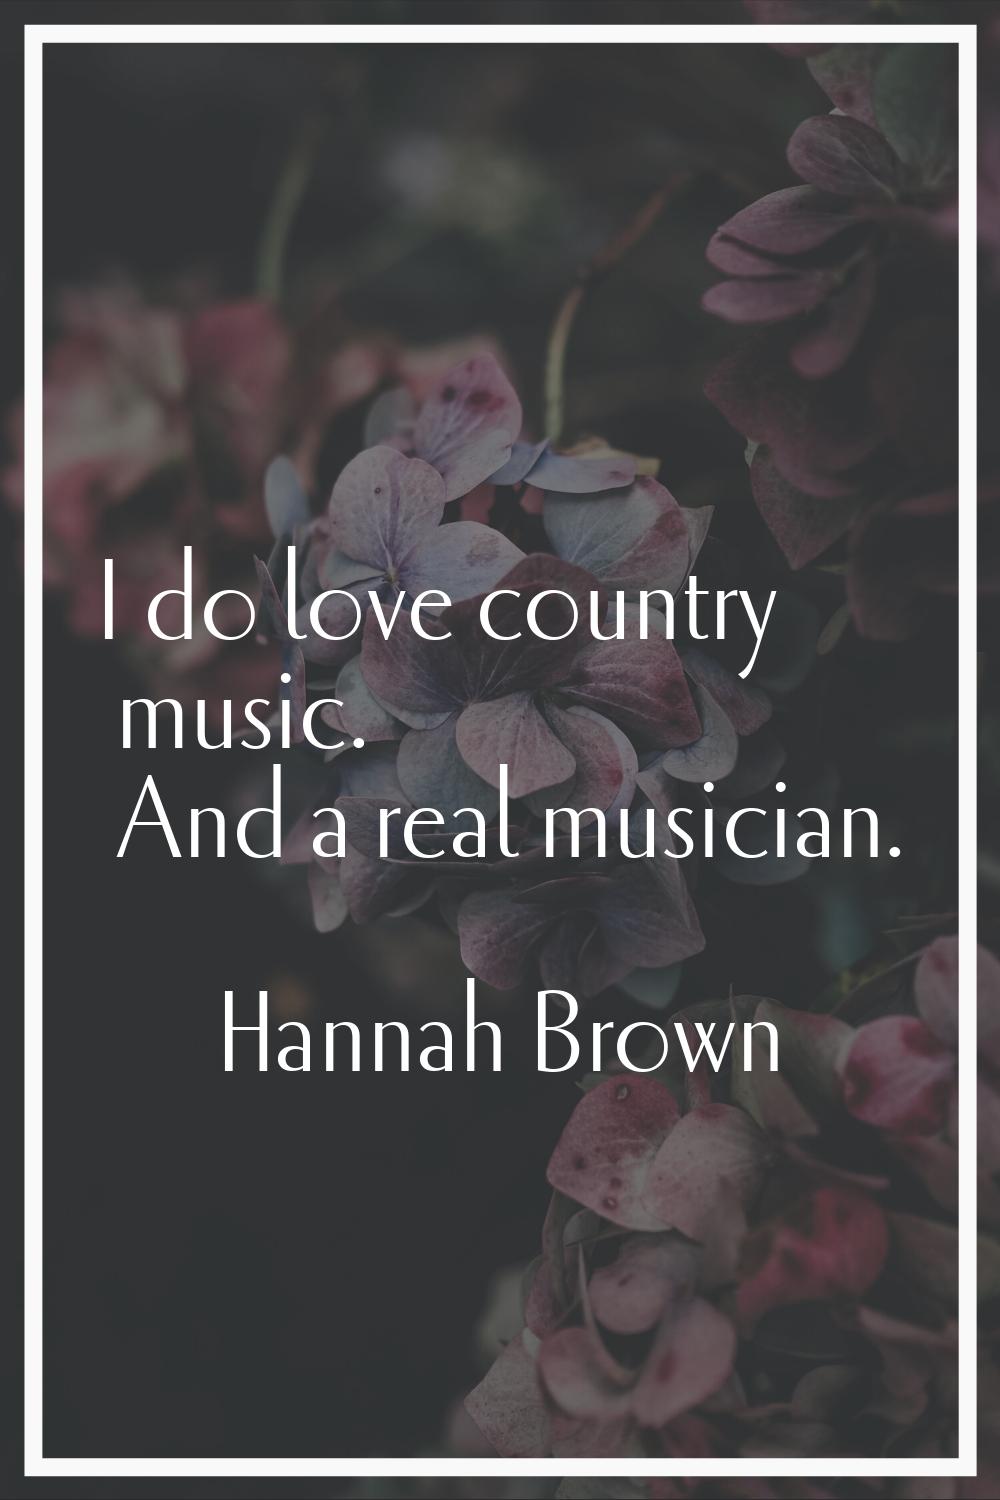 I do love country music. And a real musician.